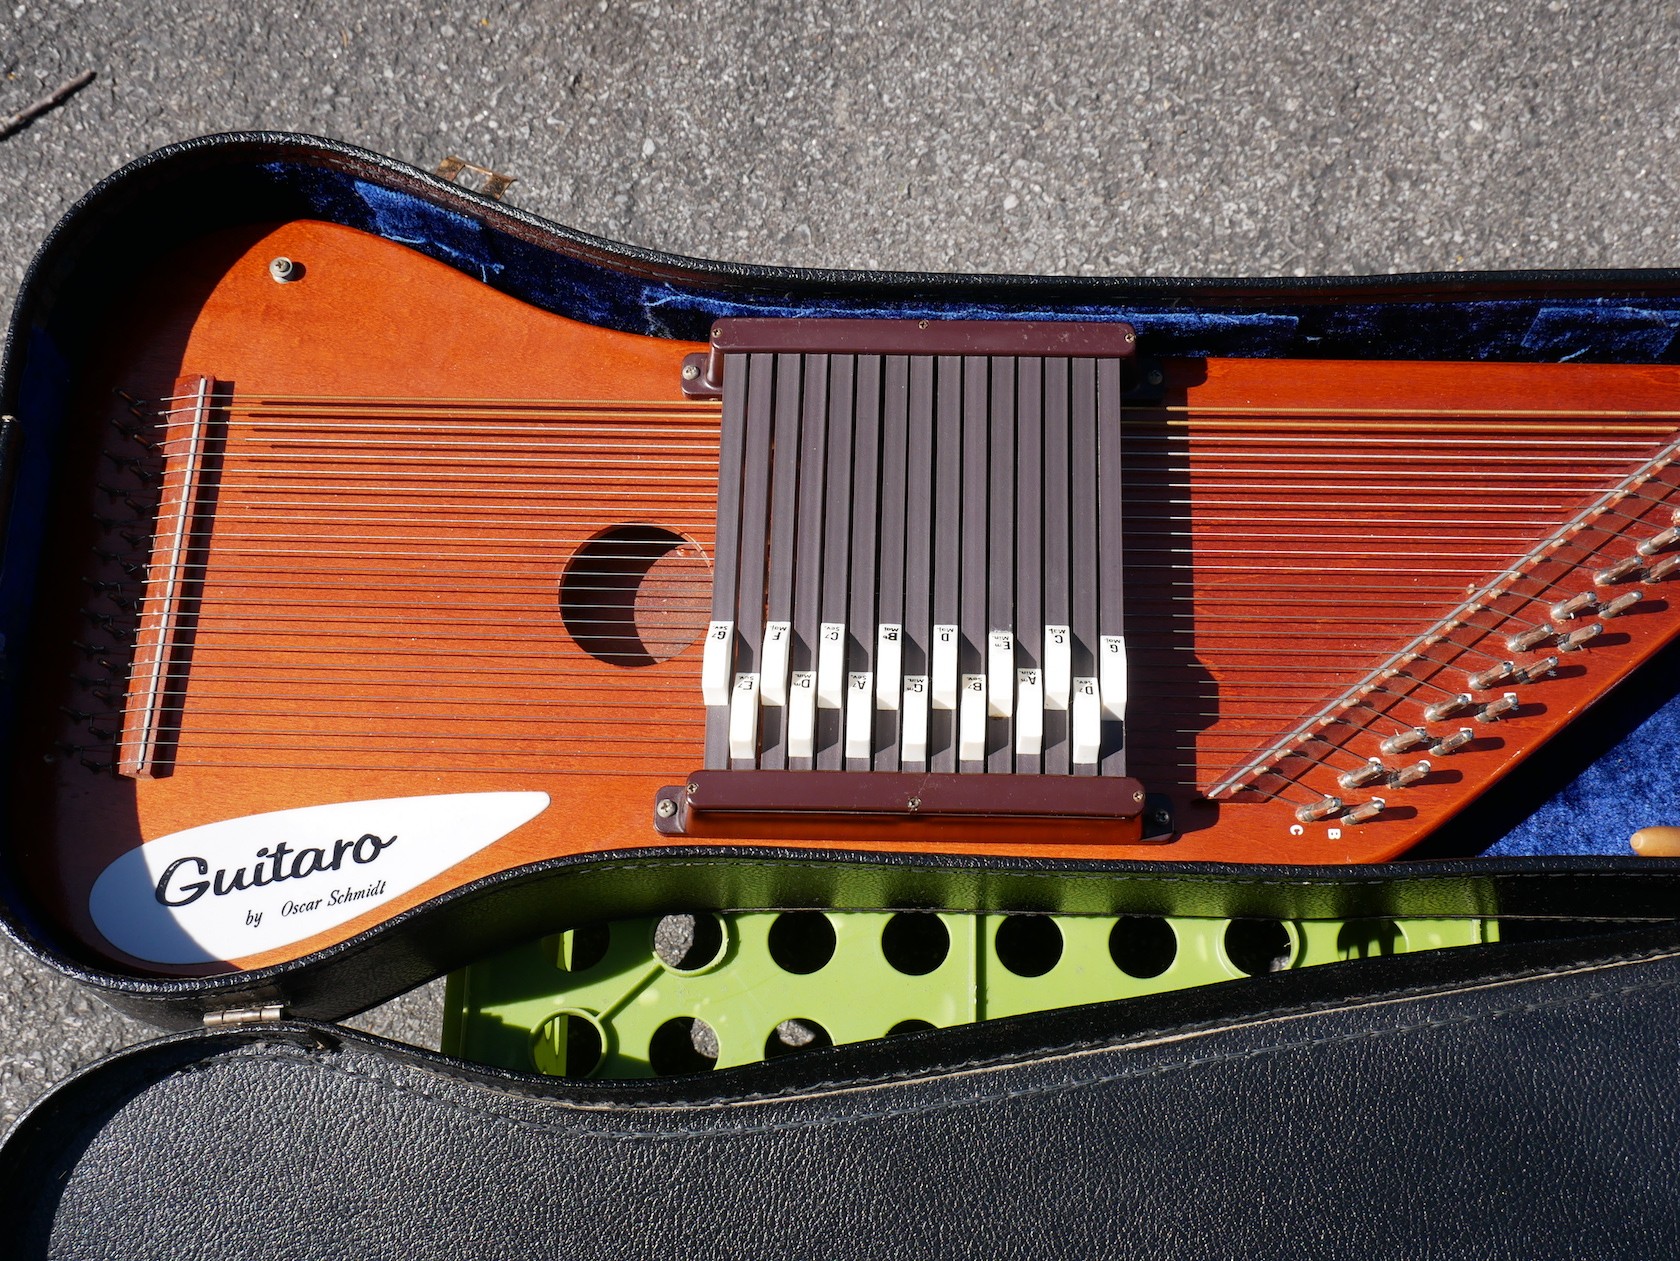 Showing the instrument in the custom velour-lined case.